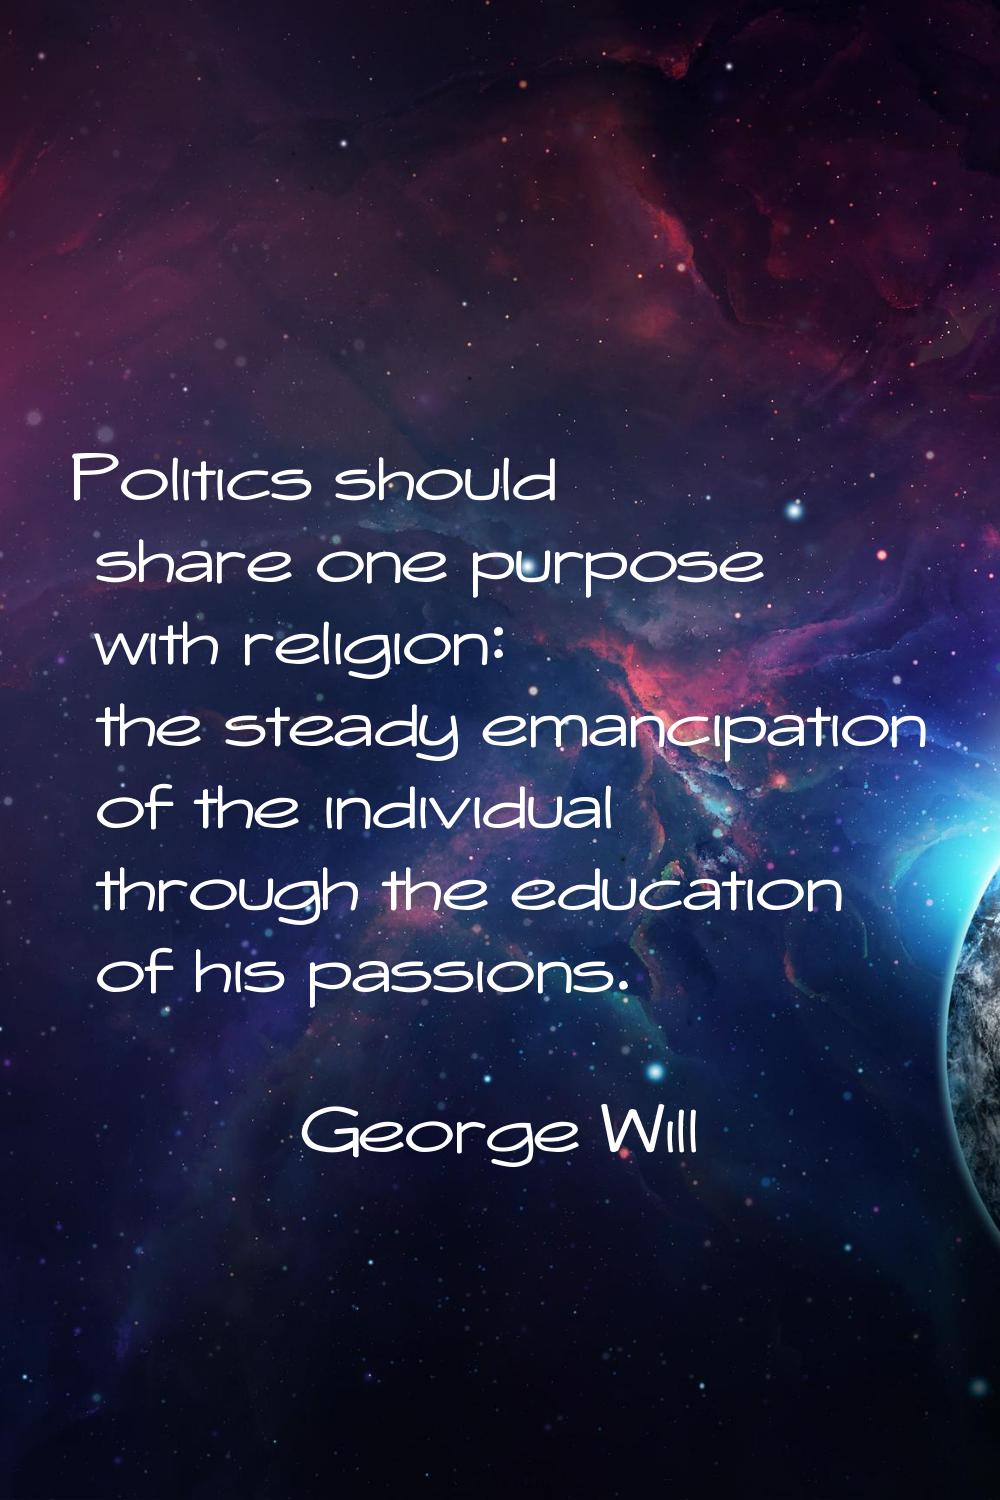 Politics should share one purpose with religion: the steady emancipation of the individual through 